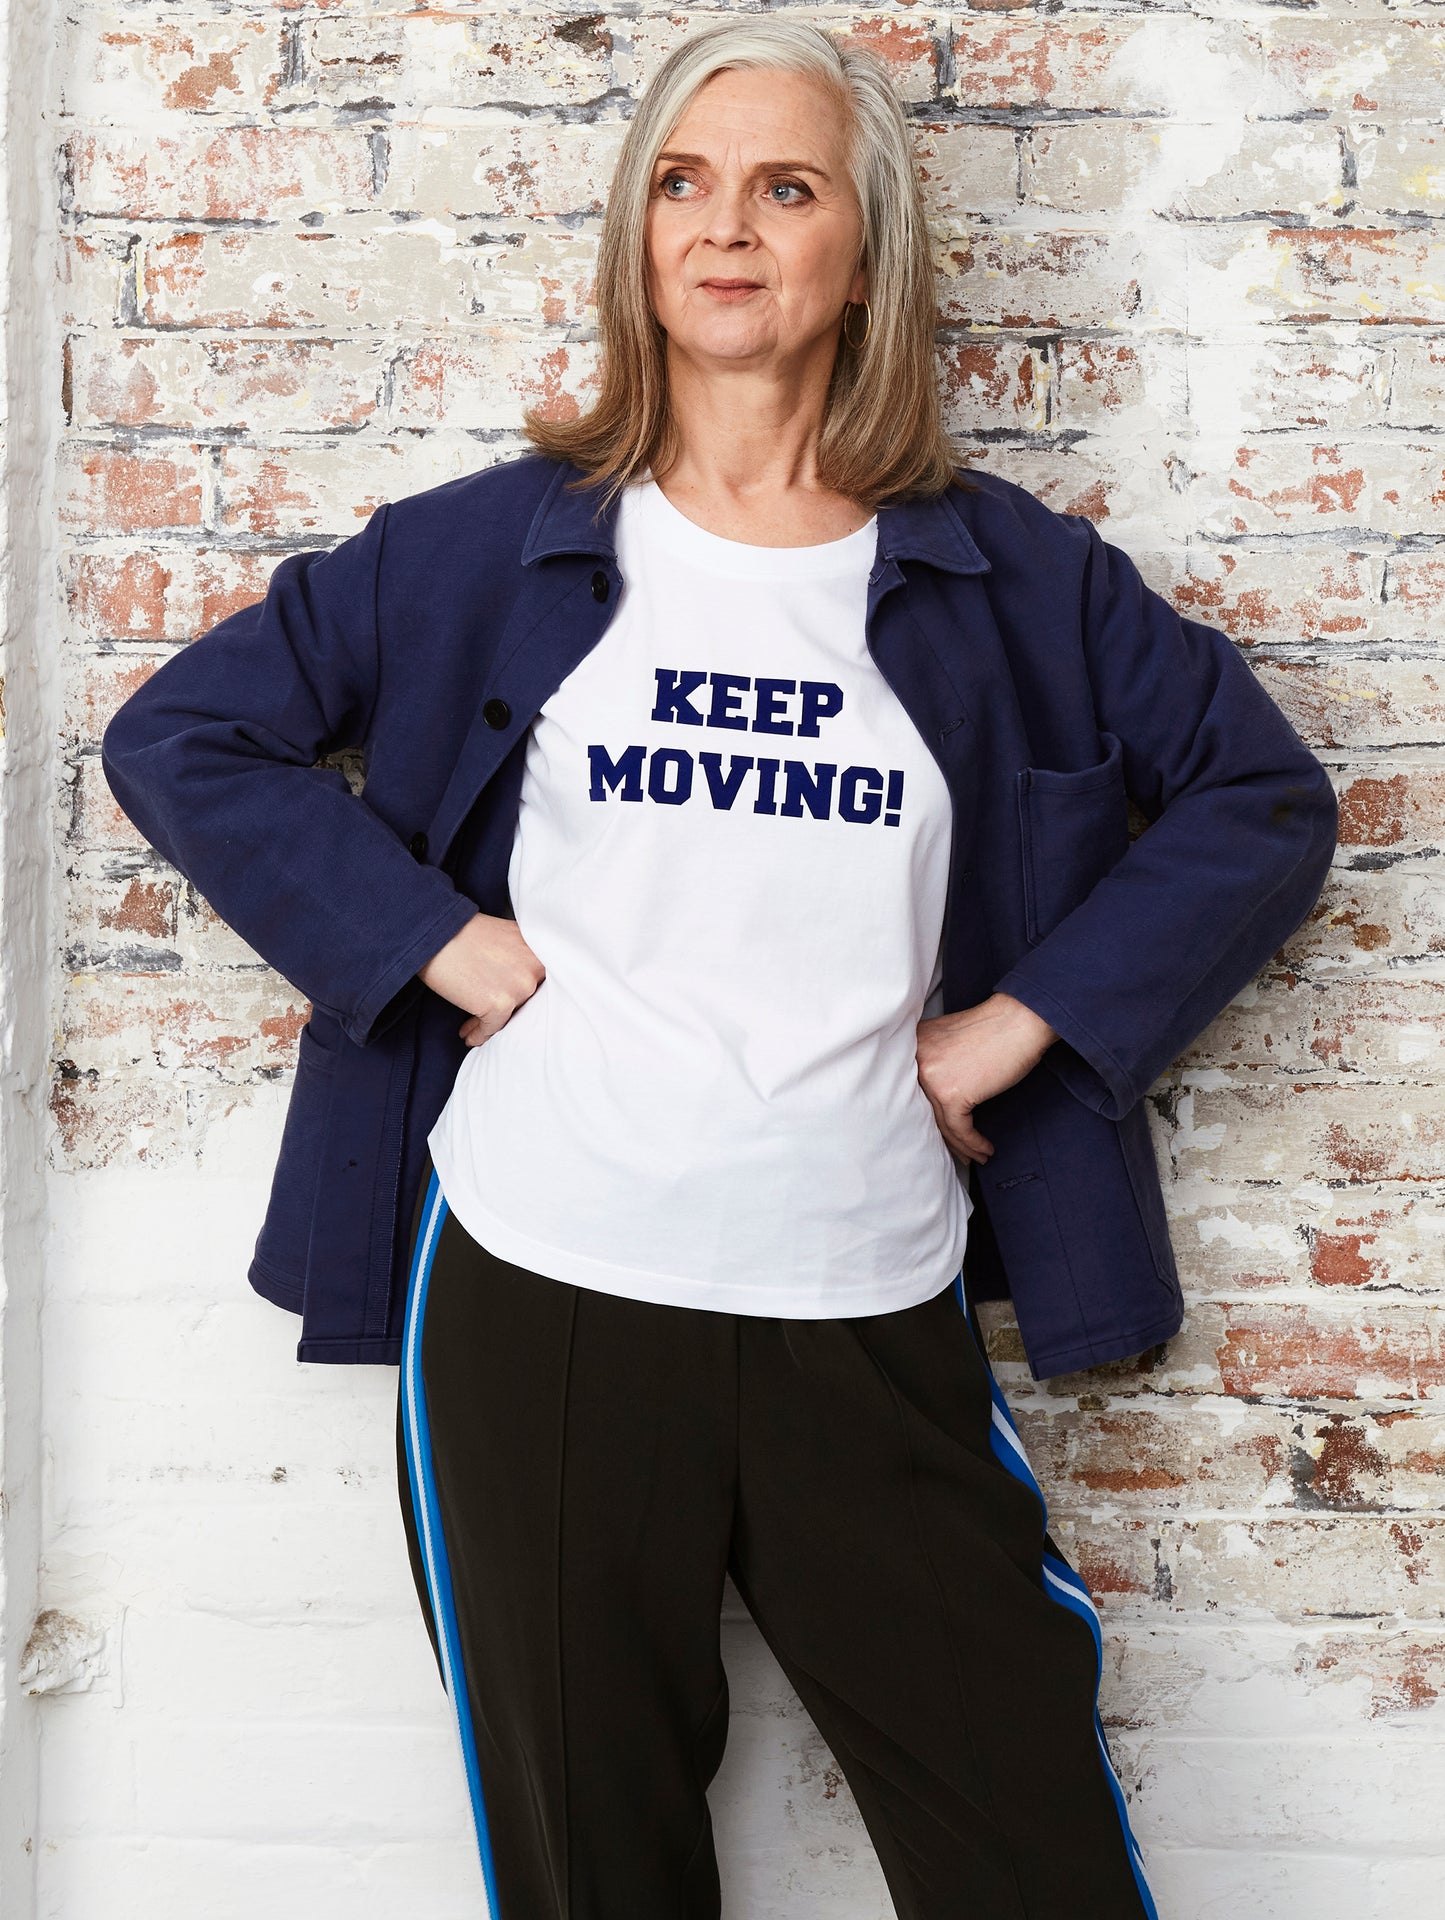 Keep moving in navy flock on a white organic cotton relaxed fit t-shirt